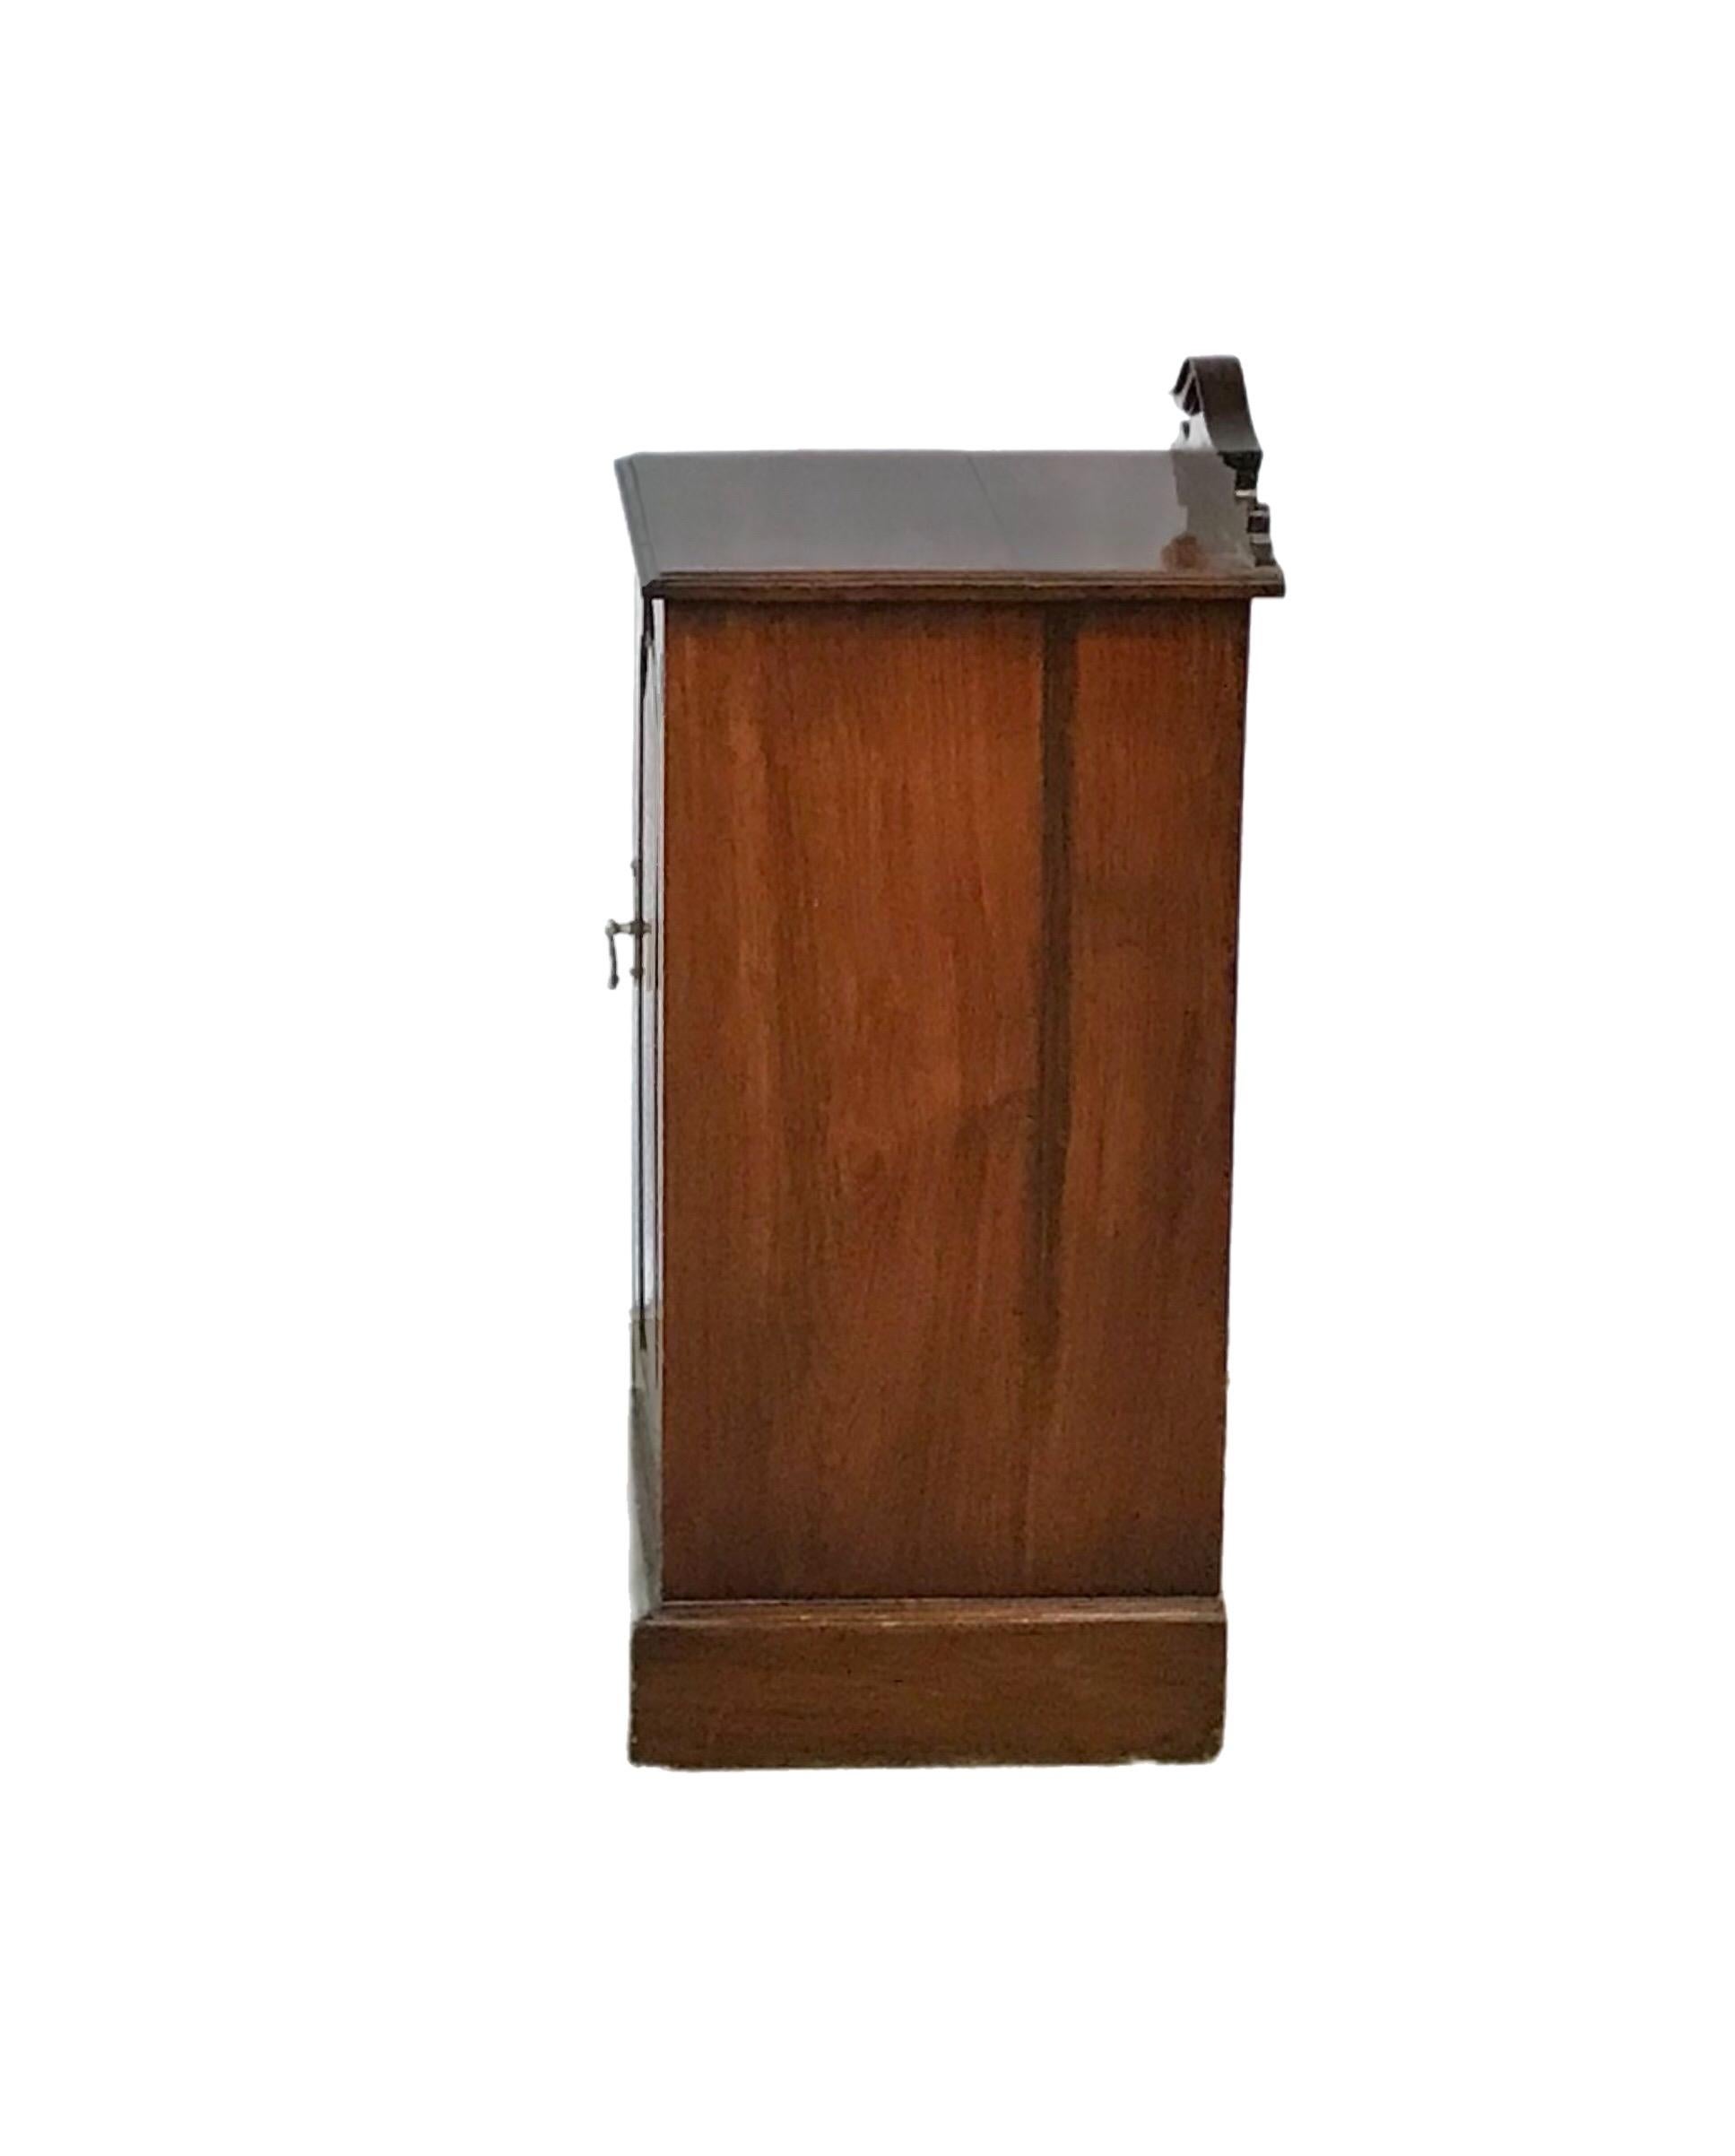 Deep rich mahogany finish gives this piece a beautiful appearance. The back panel allows for air circulation with the multiple drillings.